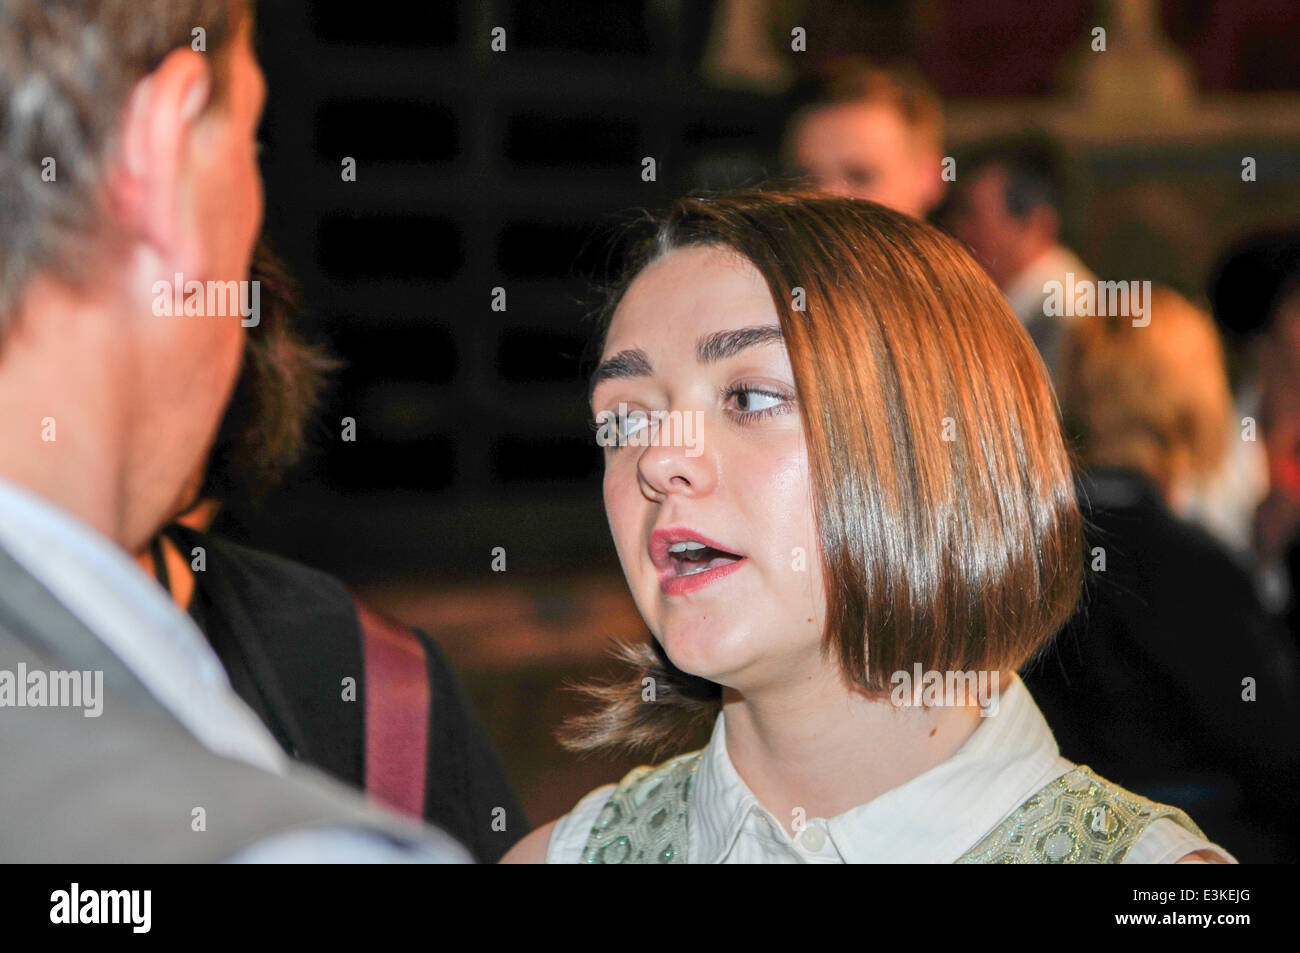 Belfast, Northern Ireland. 24 Jun 2014 - Maisie Williams, who plays Arya Stark, gives her reaction to meeting Her Majesty Queen Elizabeth II after she visited the Game of Thrones film studios in Belfast. Credit:  Stephen Barnes/Alamy Live News Stock Photo